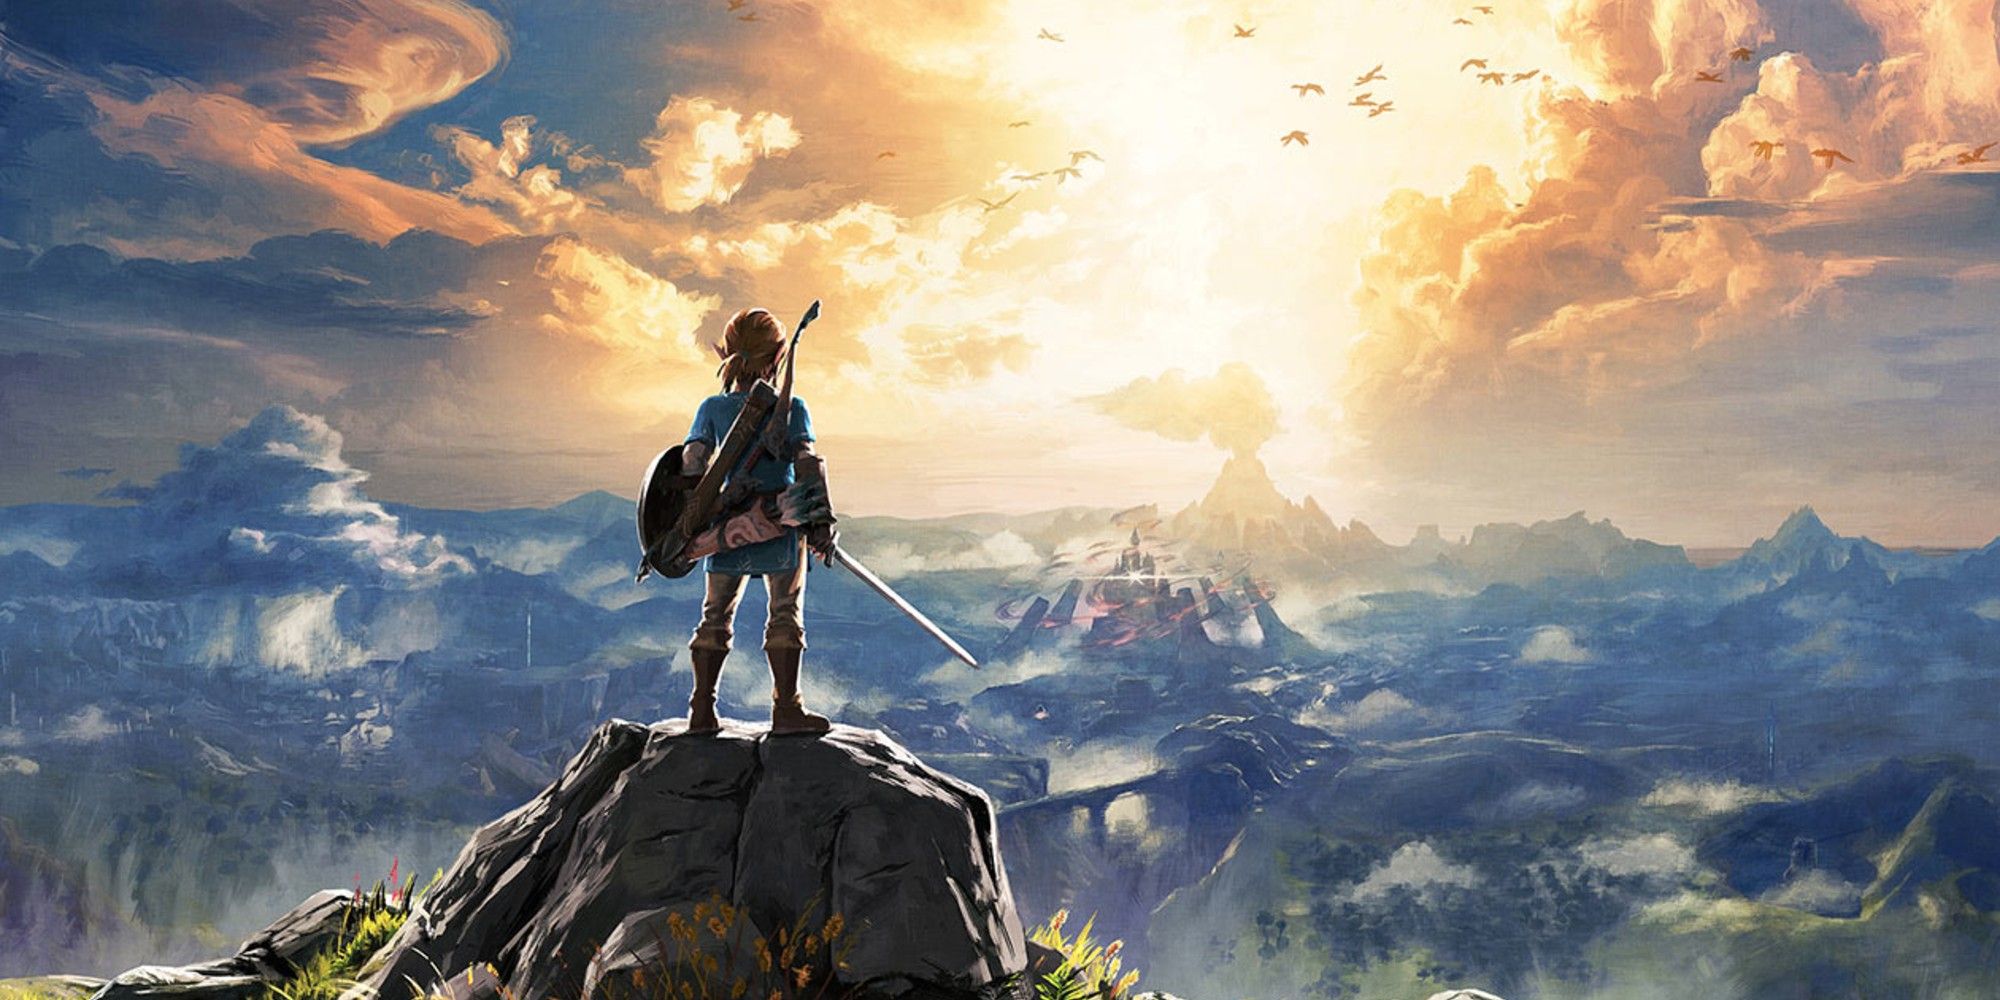 Link stands atop a cliff in key art for The Legend of Zelda: Breath of the Wild.